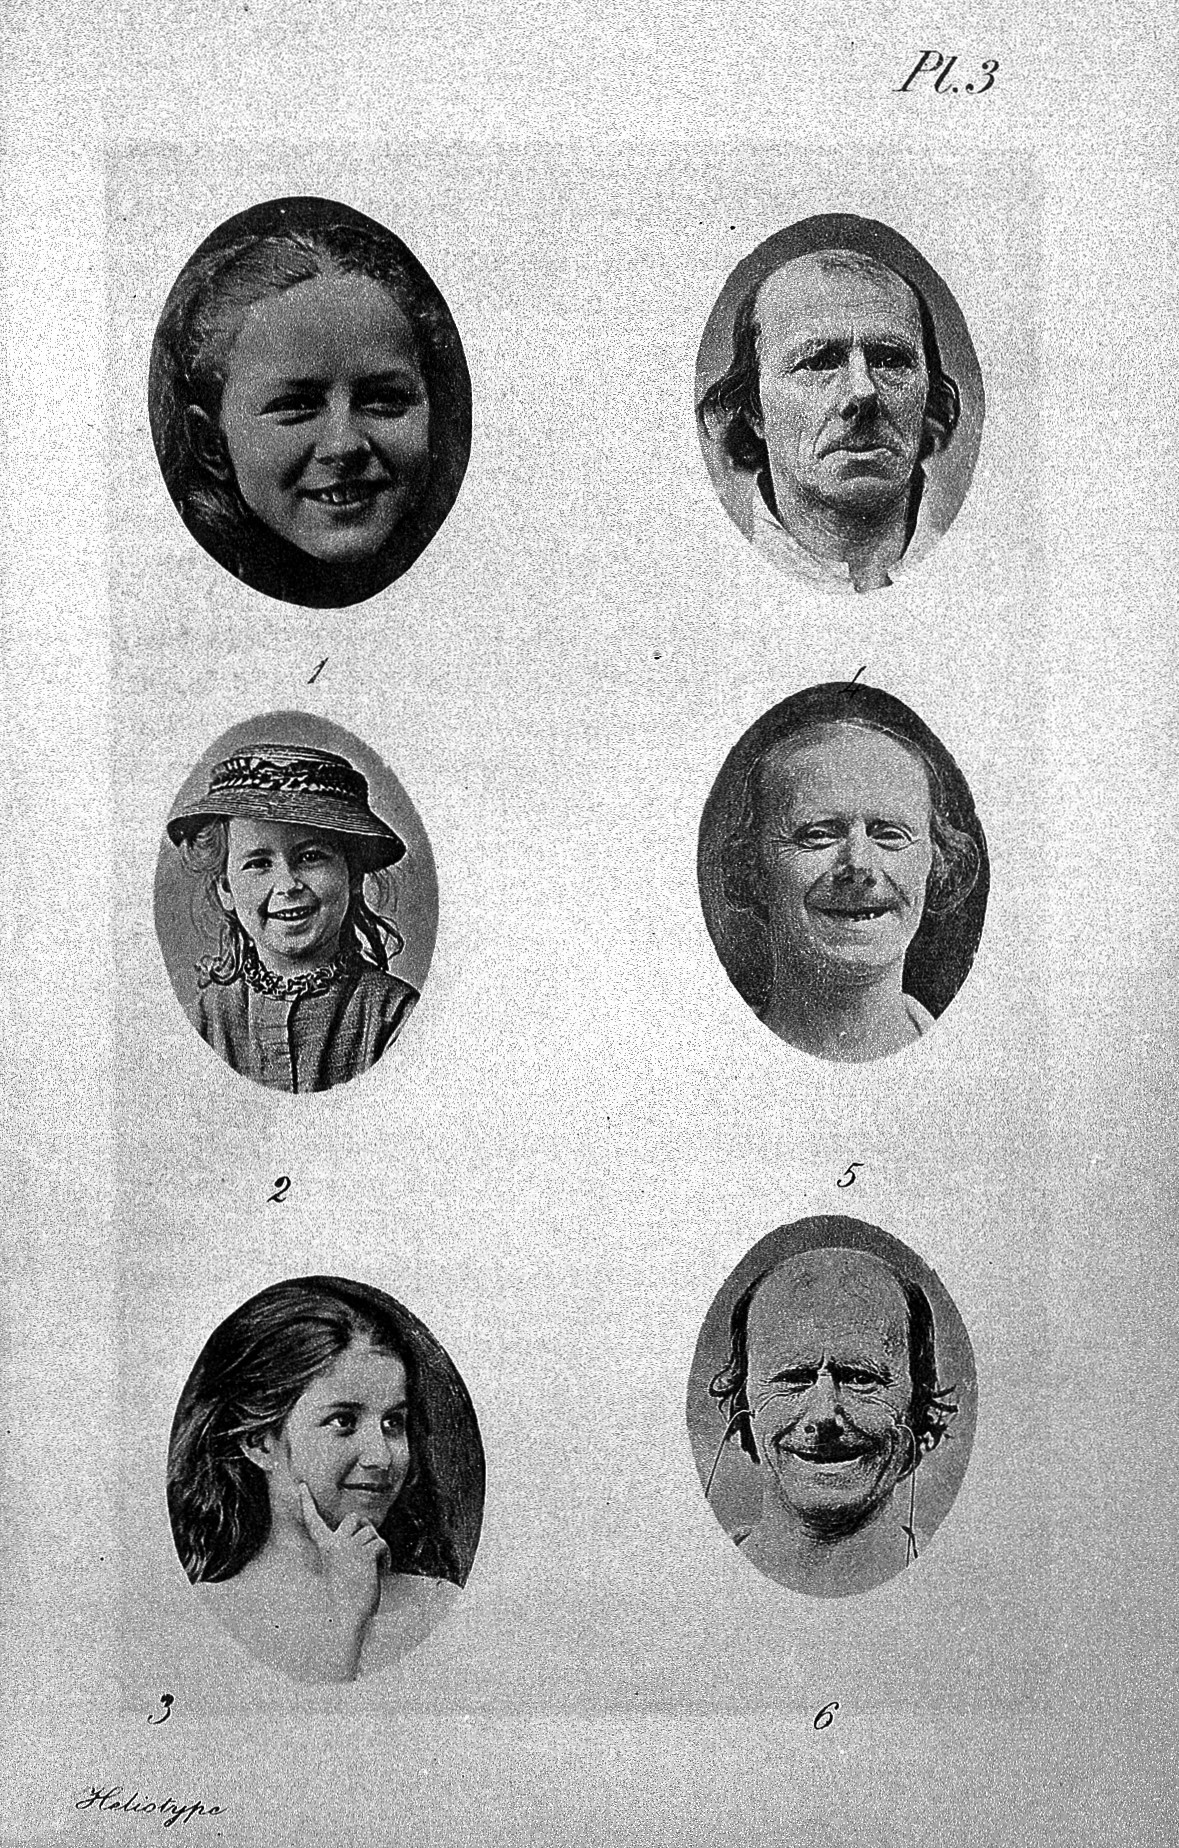 Six ovals on a white background containing images. On the left are three smiling girls. On the right all three pictures depict the same man with a receding hairline and small moustache. He is sombre or sad in the first picture, and grinning in the second and third pictures.